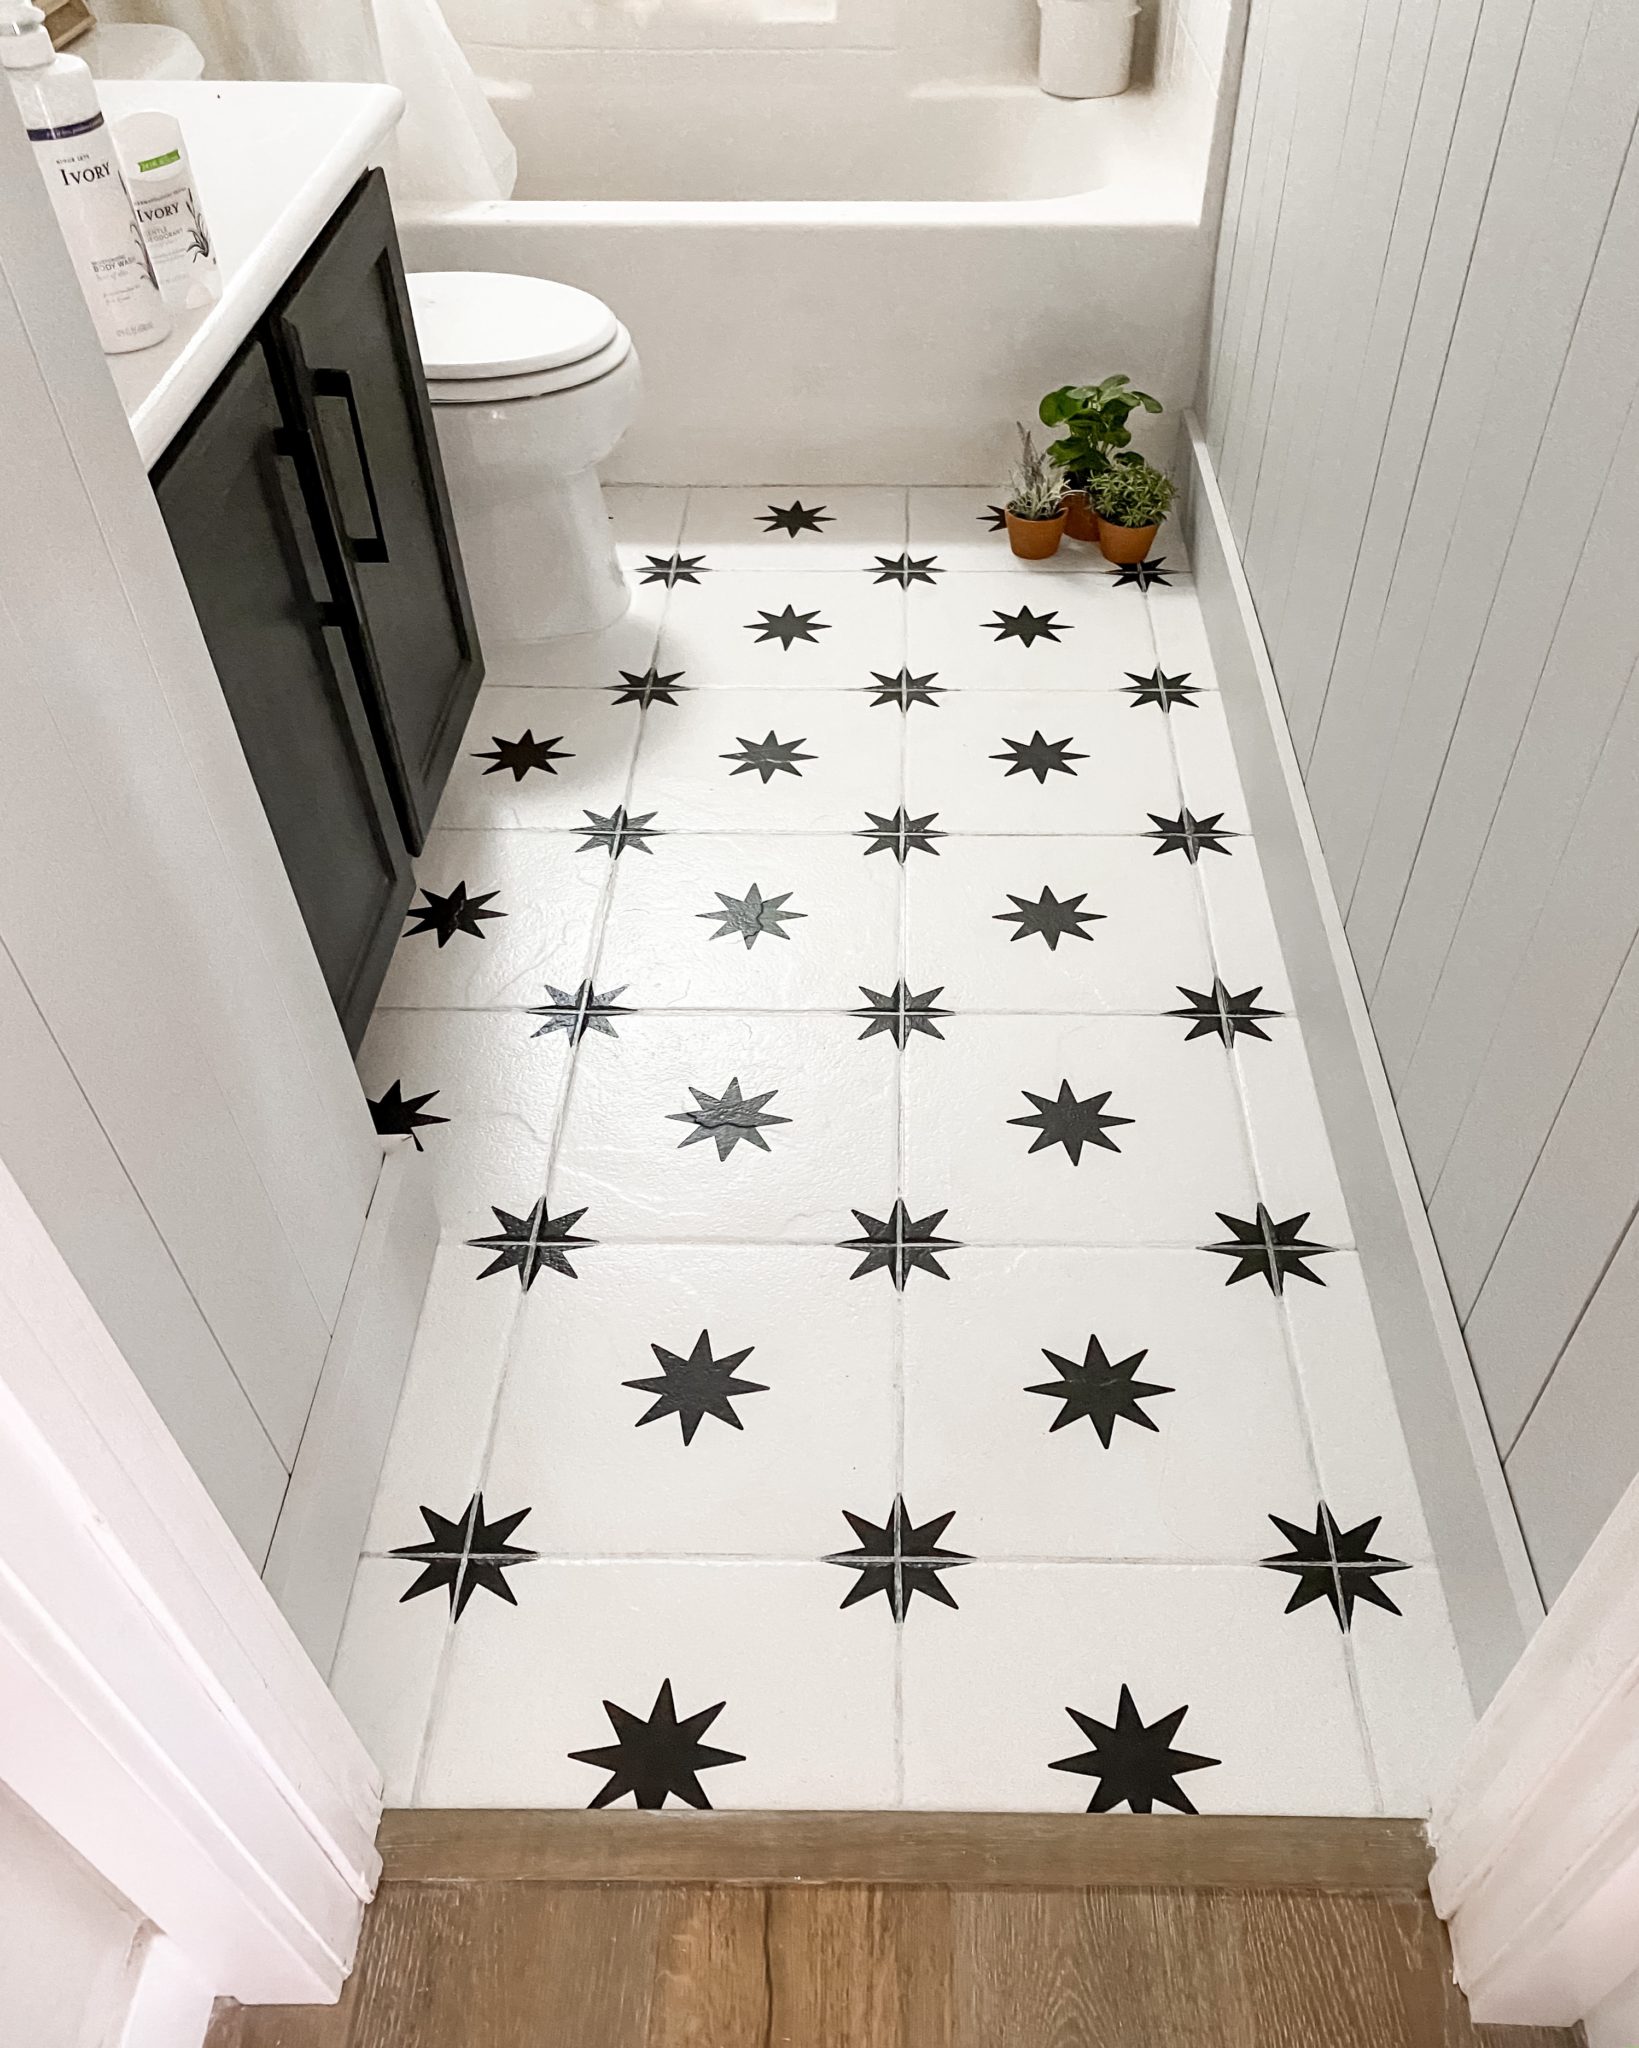 Tips to Stencil Tile Floors in your Bathroom